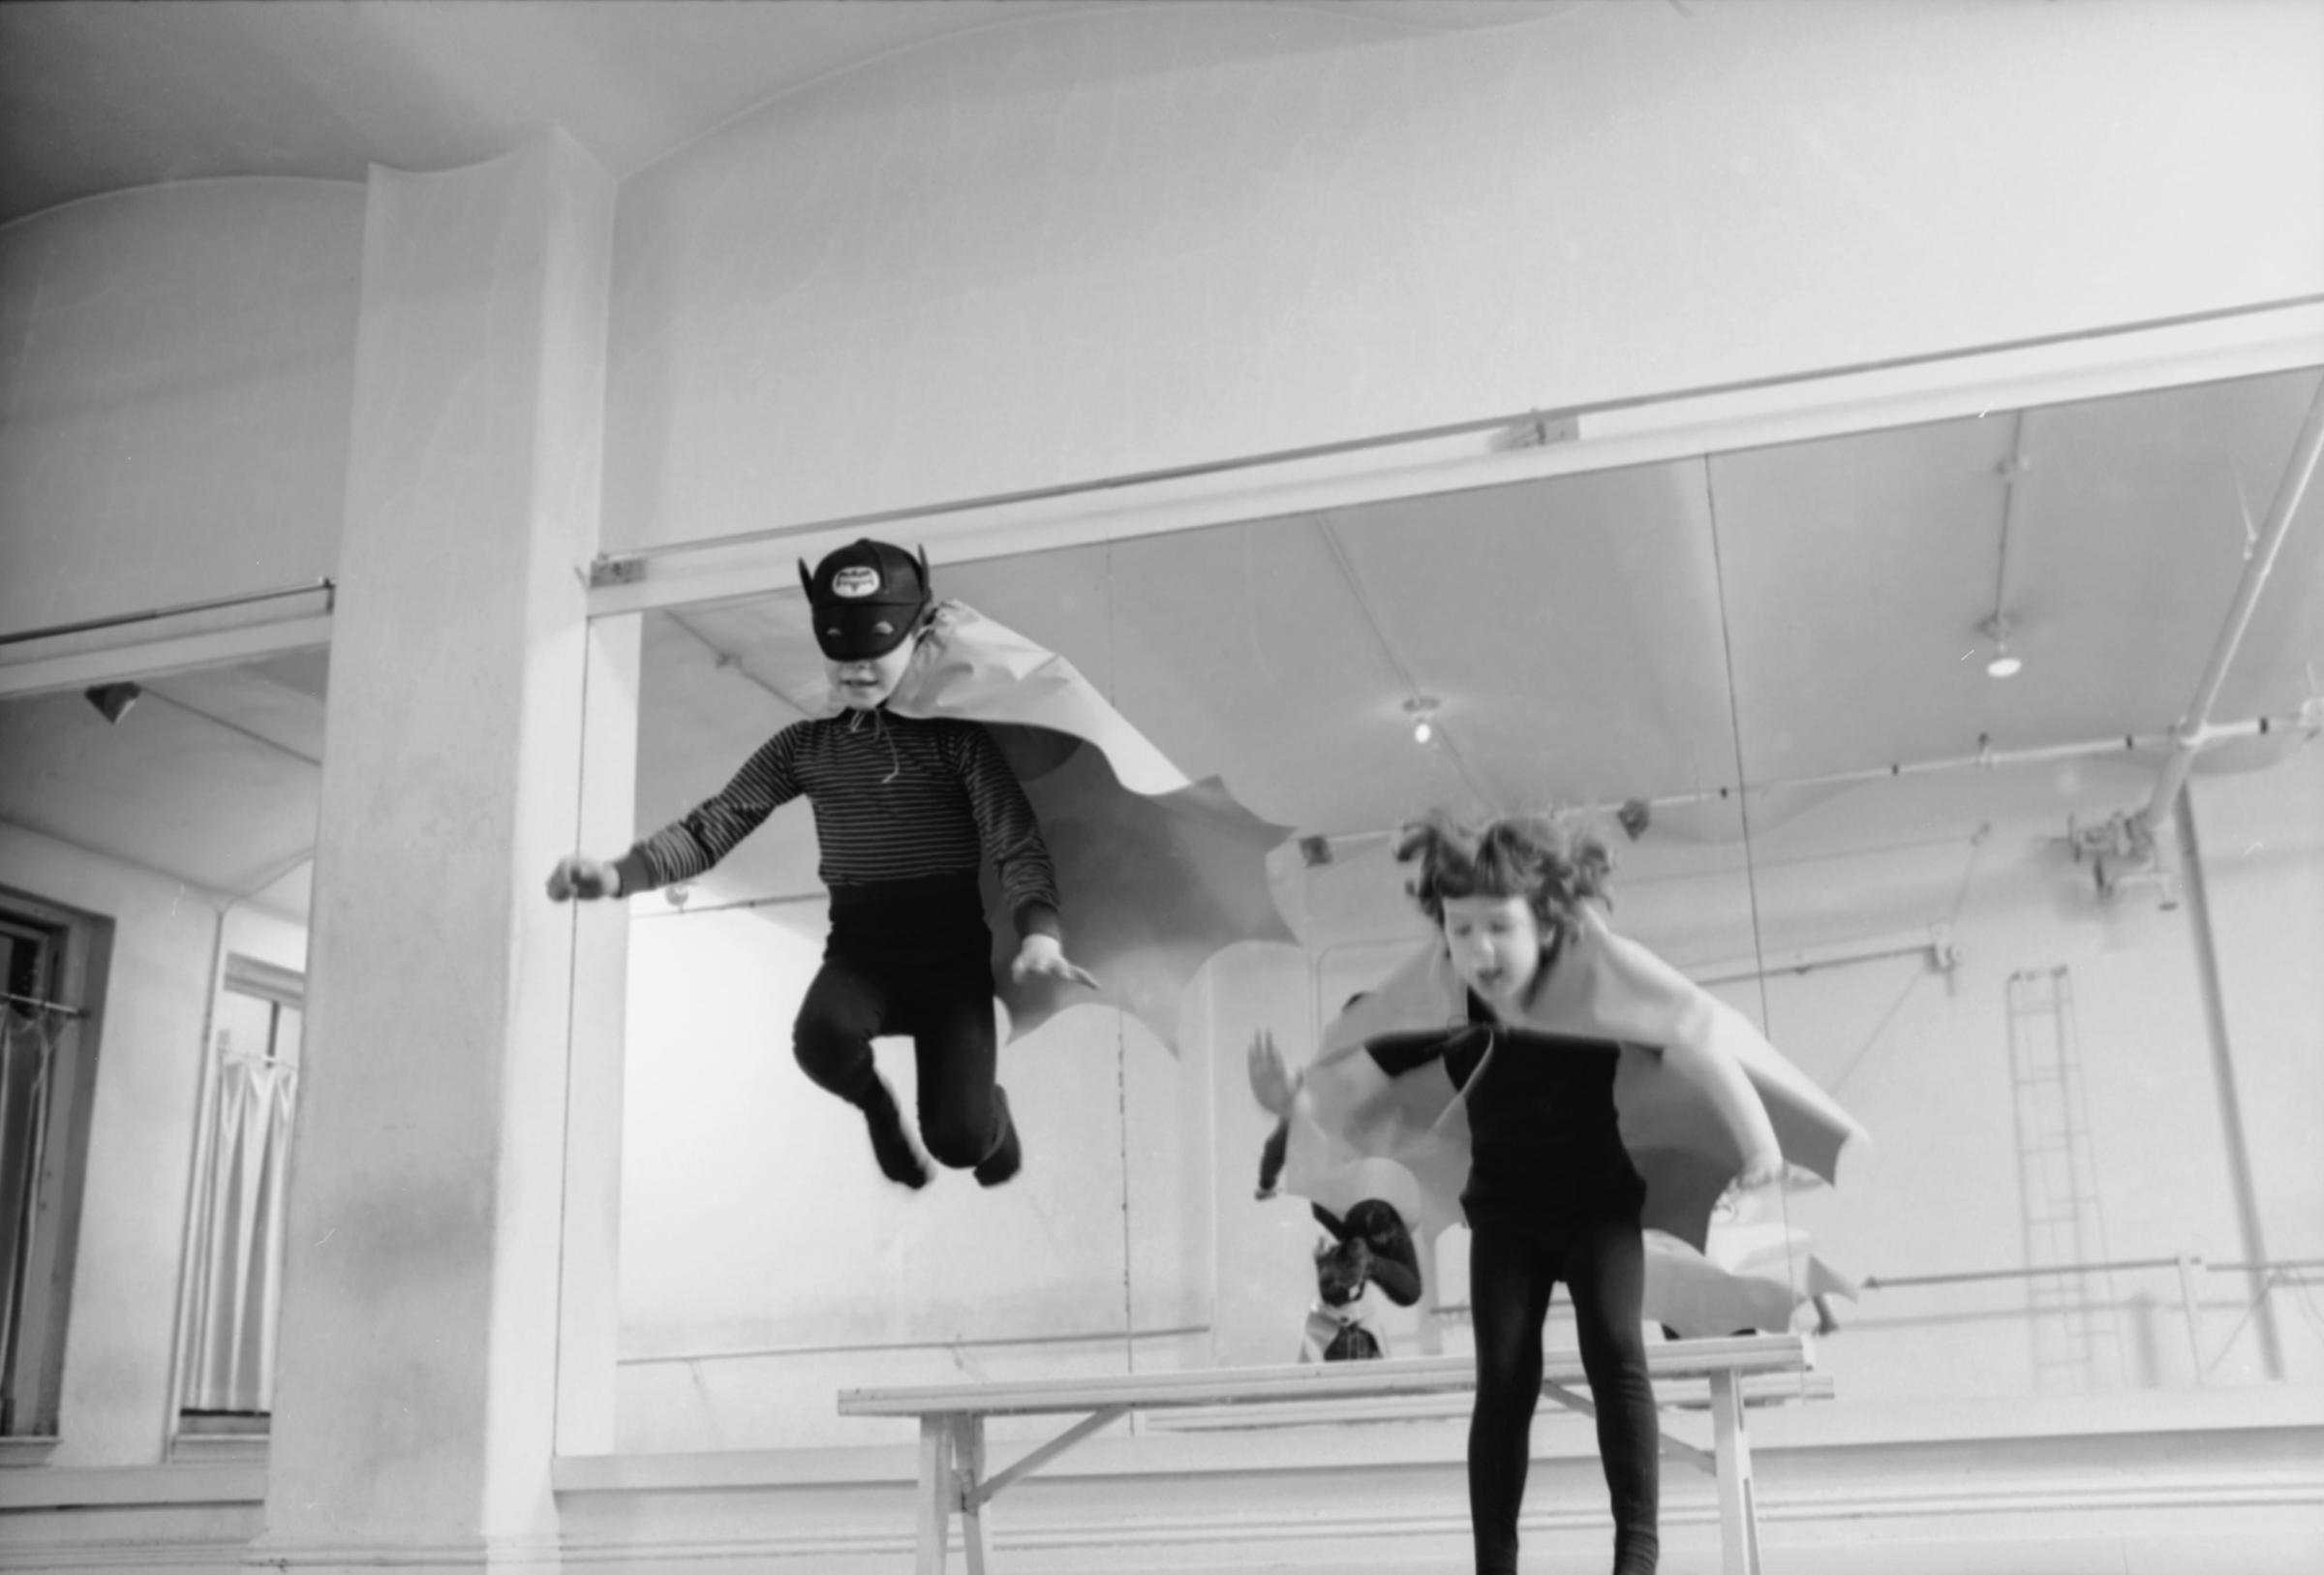 Two bat people, Colin Wightman, 6, and Kitty Blumberg, 4, of New York, leap into action.